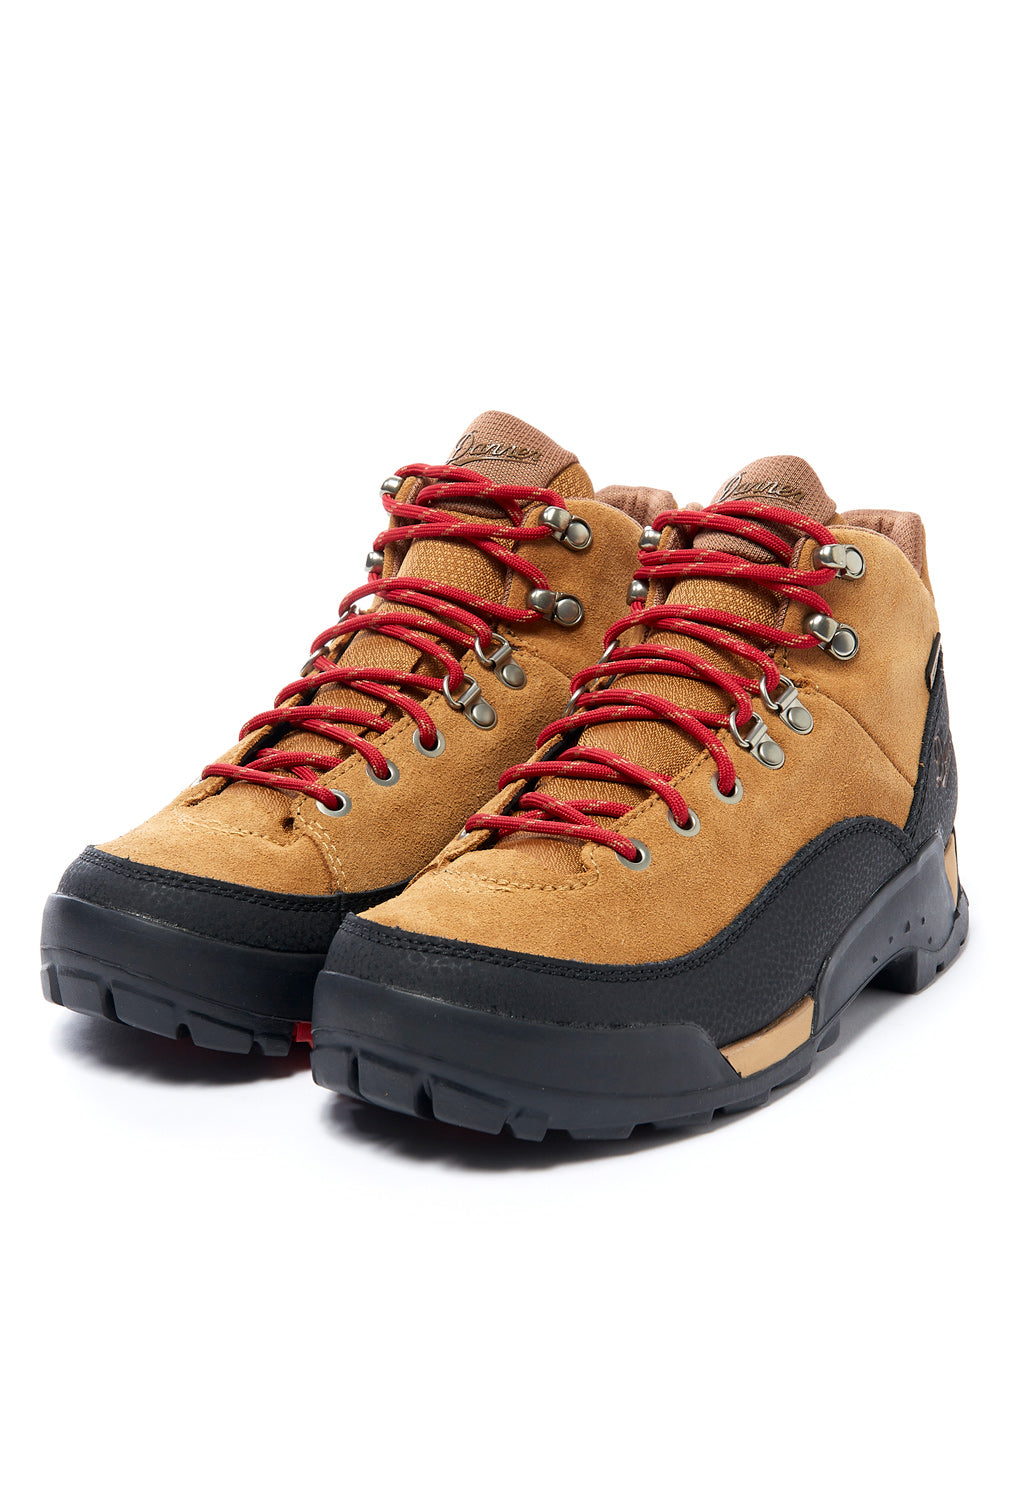 Danner Women's Panorama Mid Boots - Brown / Red